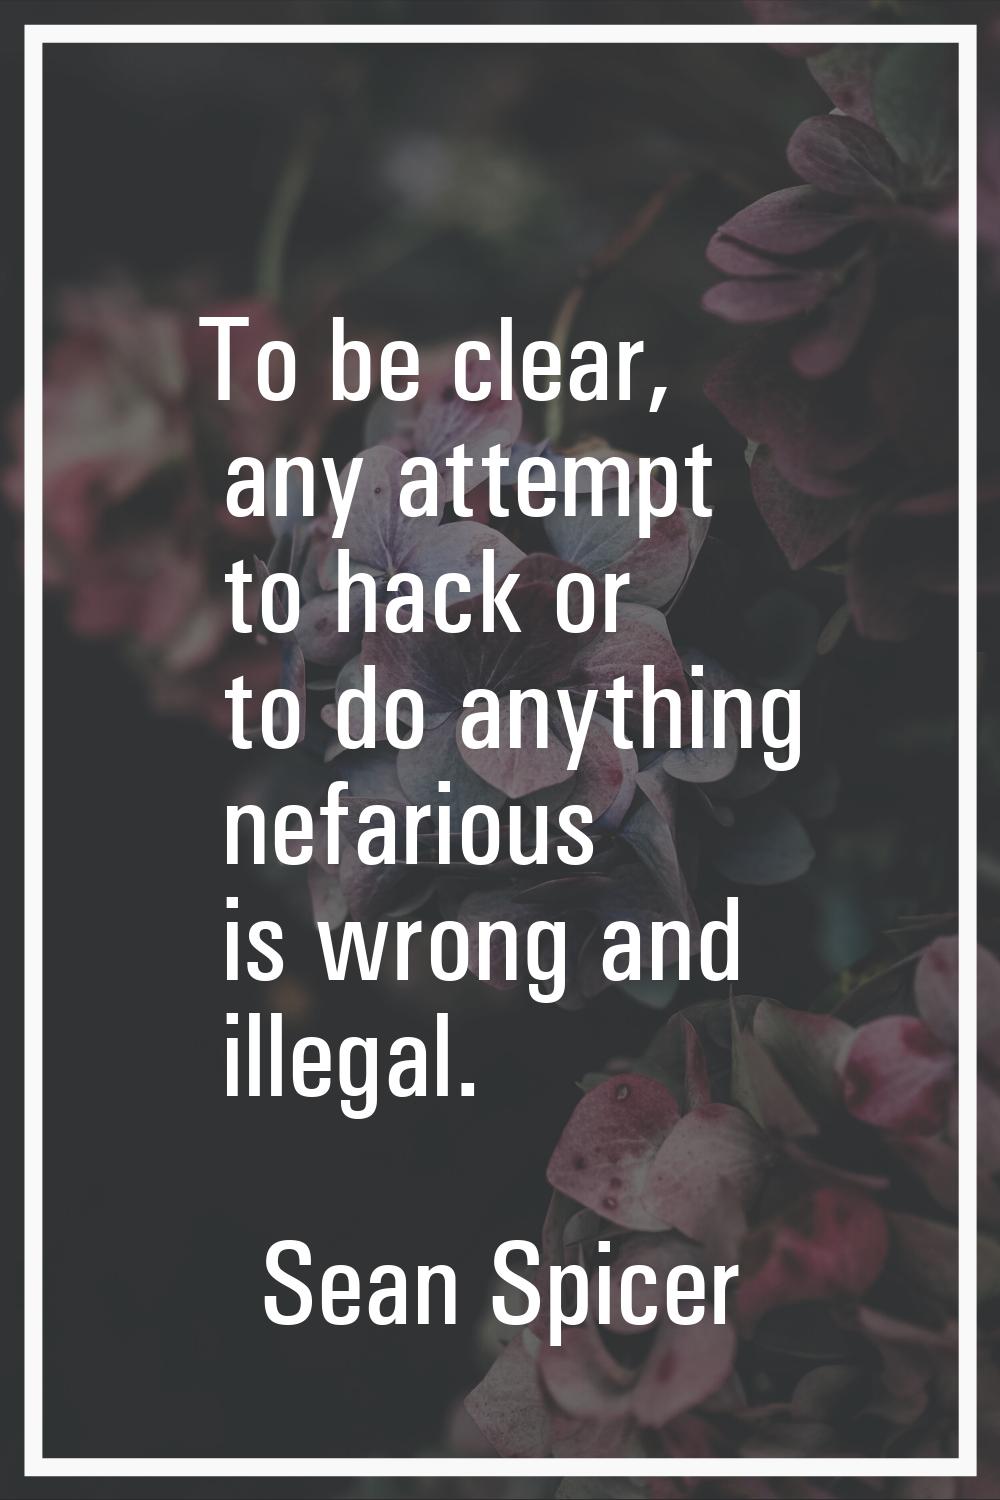 To be clear, any attempt to hack or to do anything nefarious is wrong and illegal.